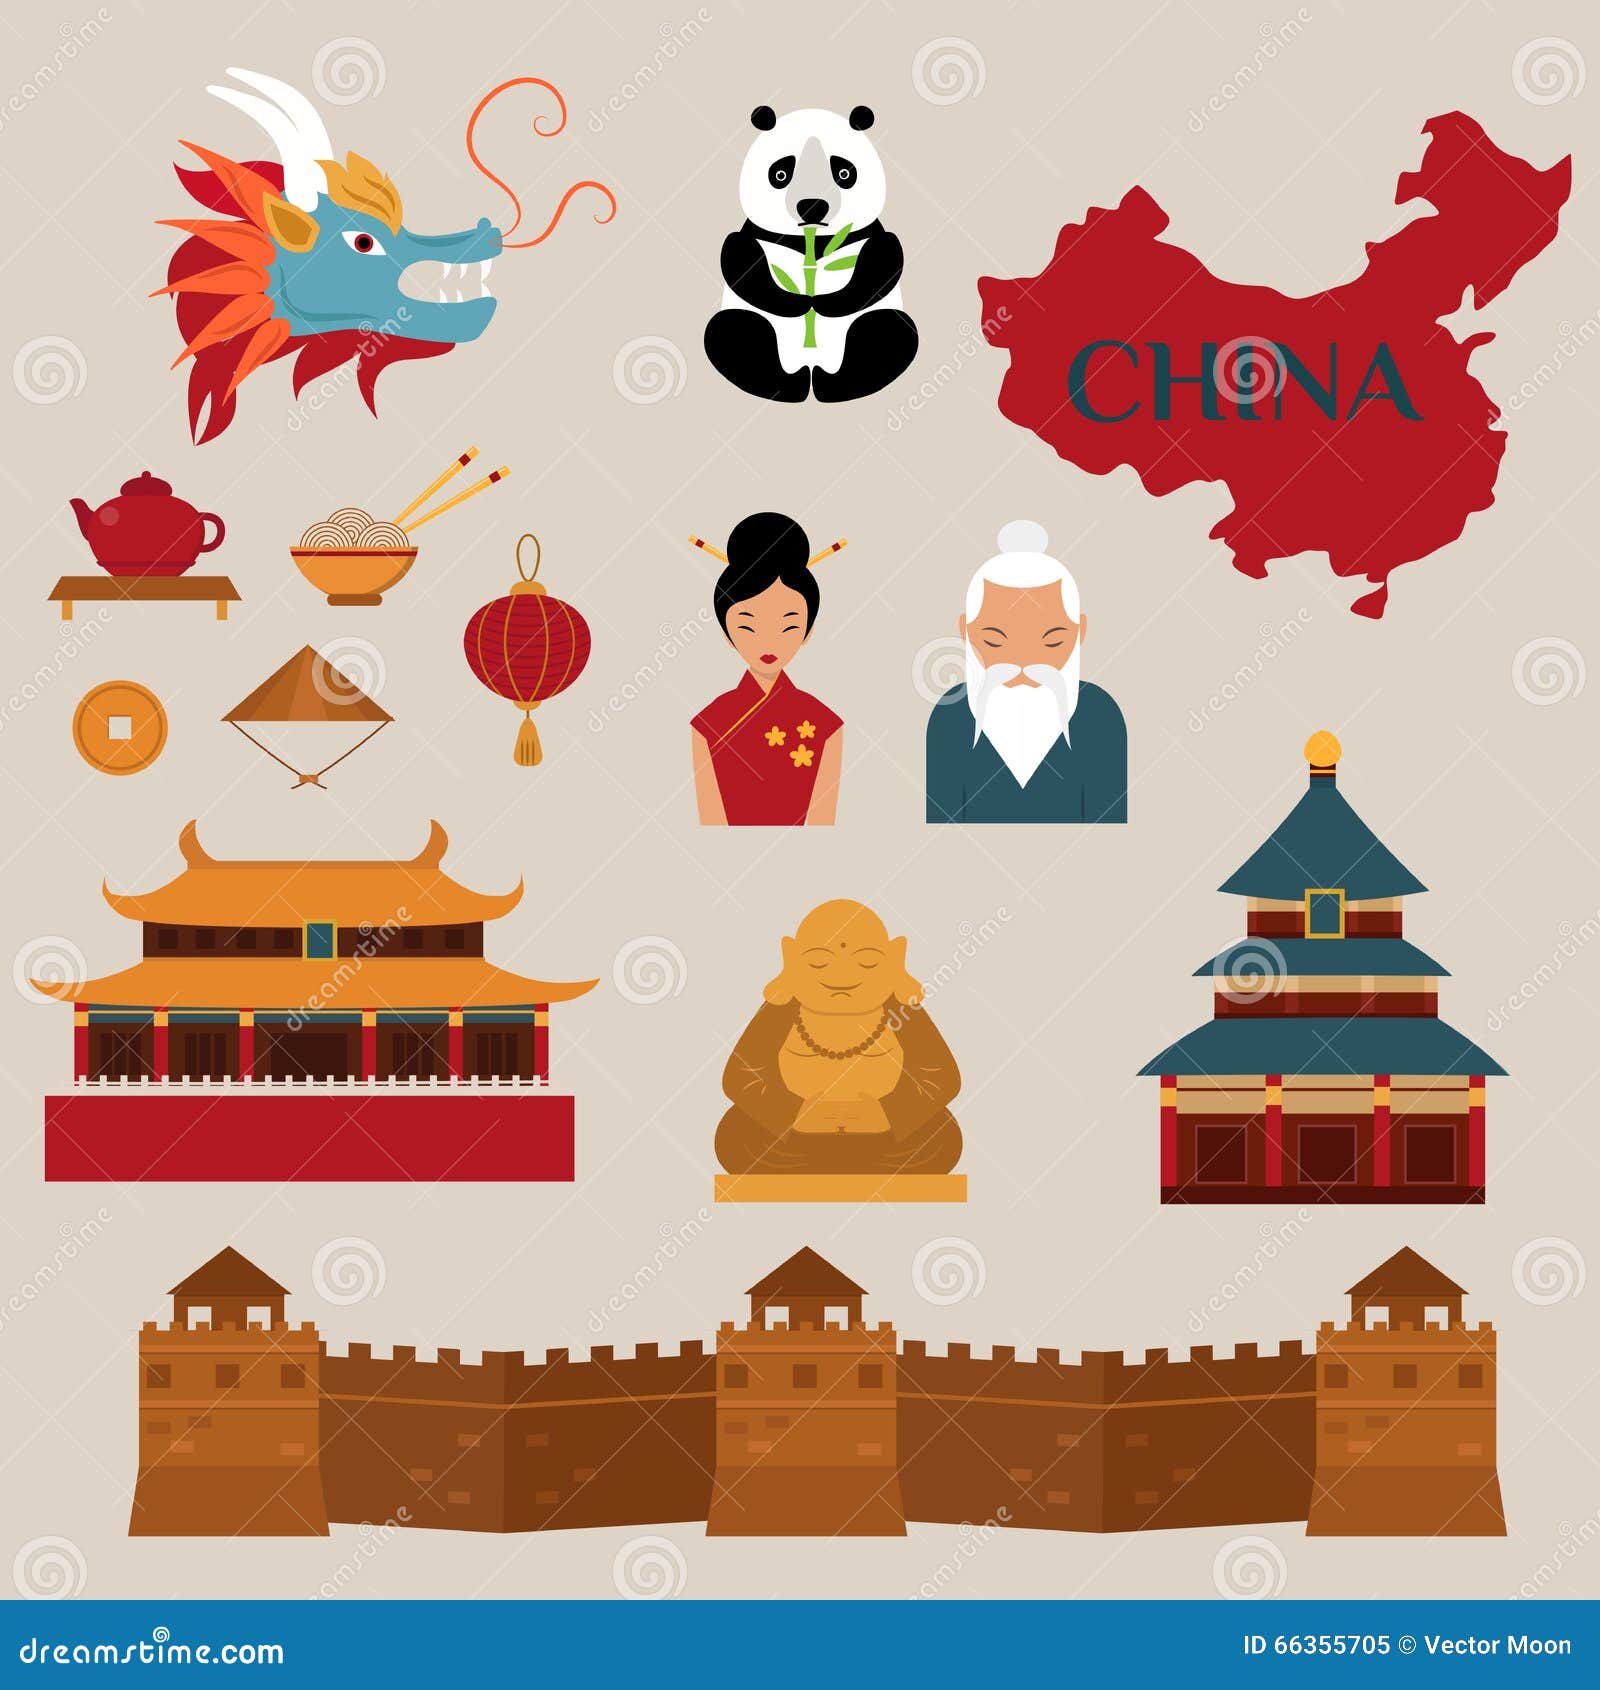 chinese clip art collection - photo #25